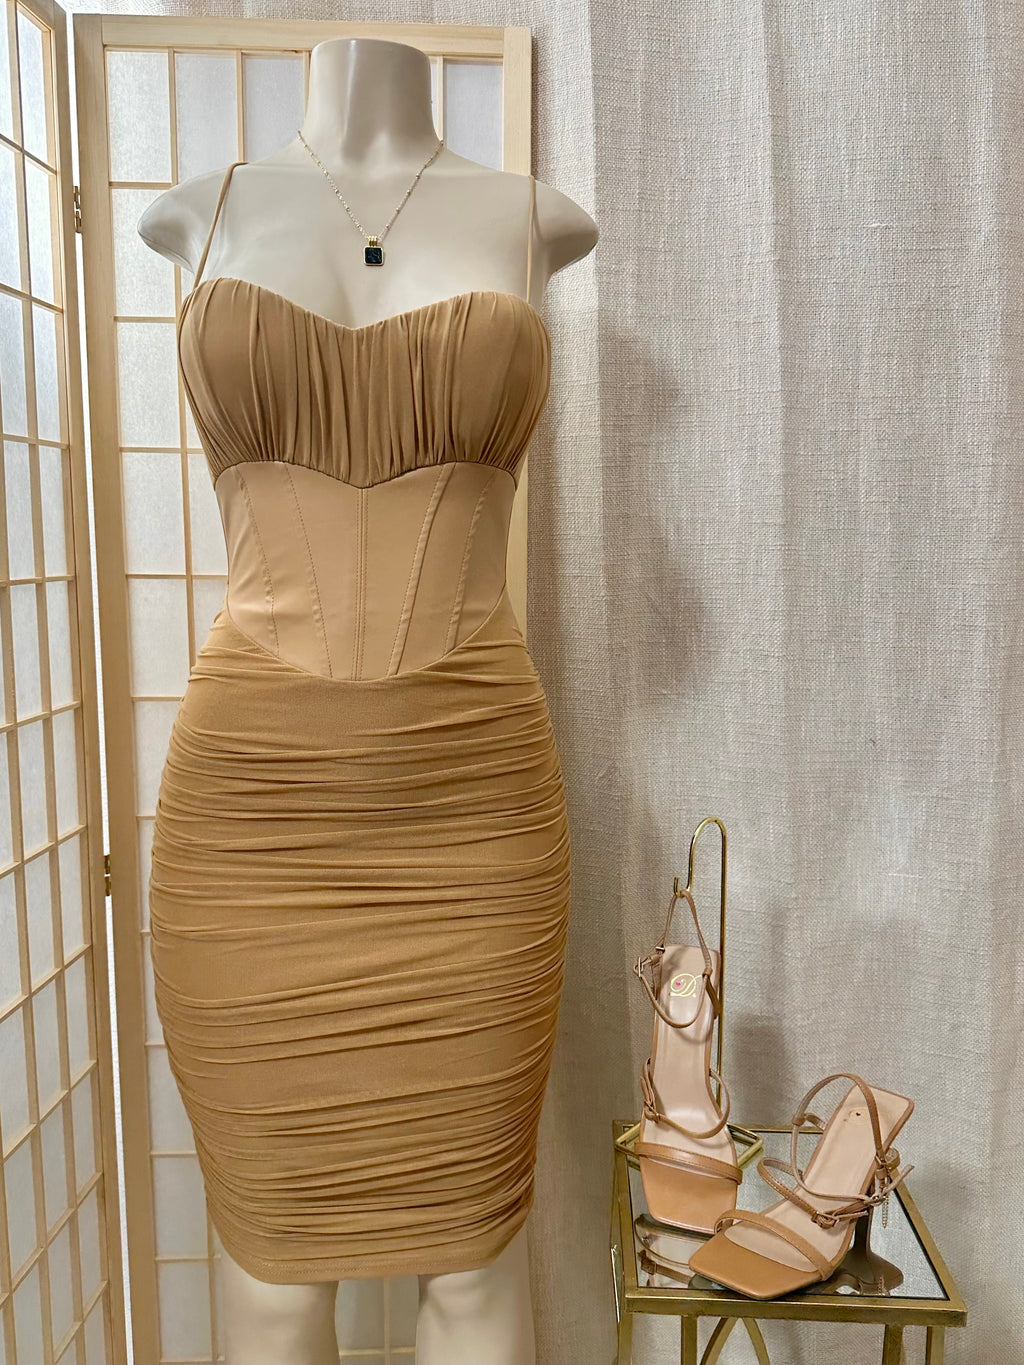 The “ Luxe Babe” Corset Dress